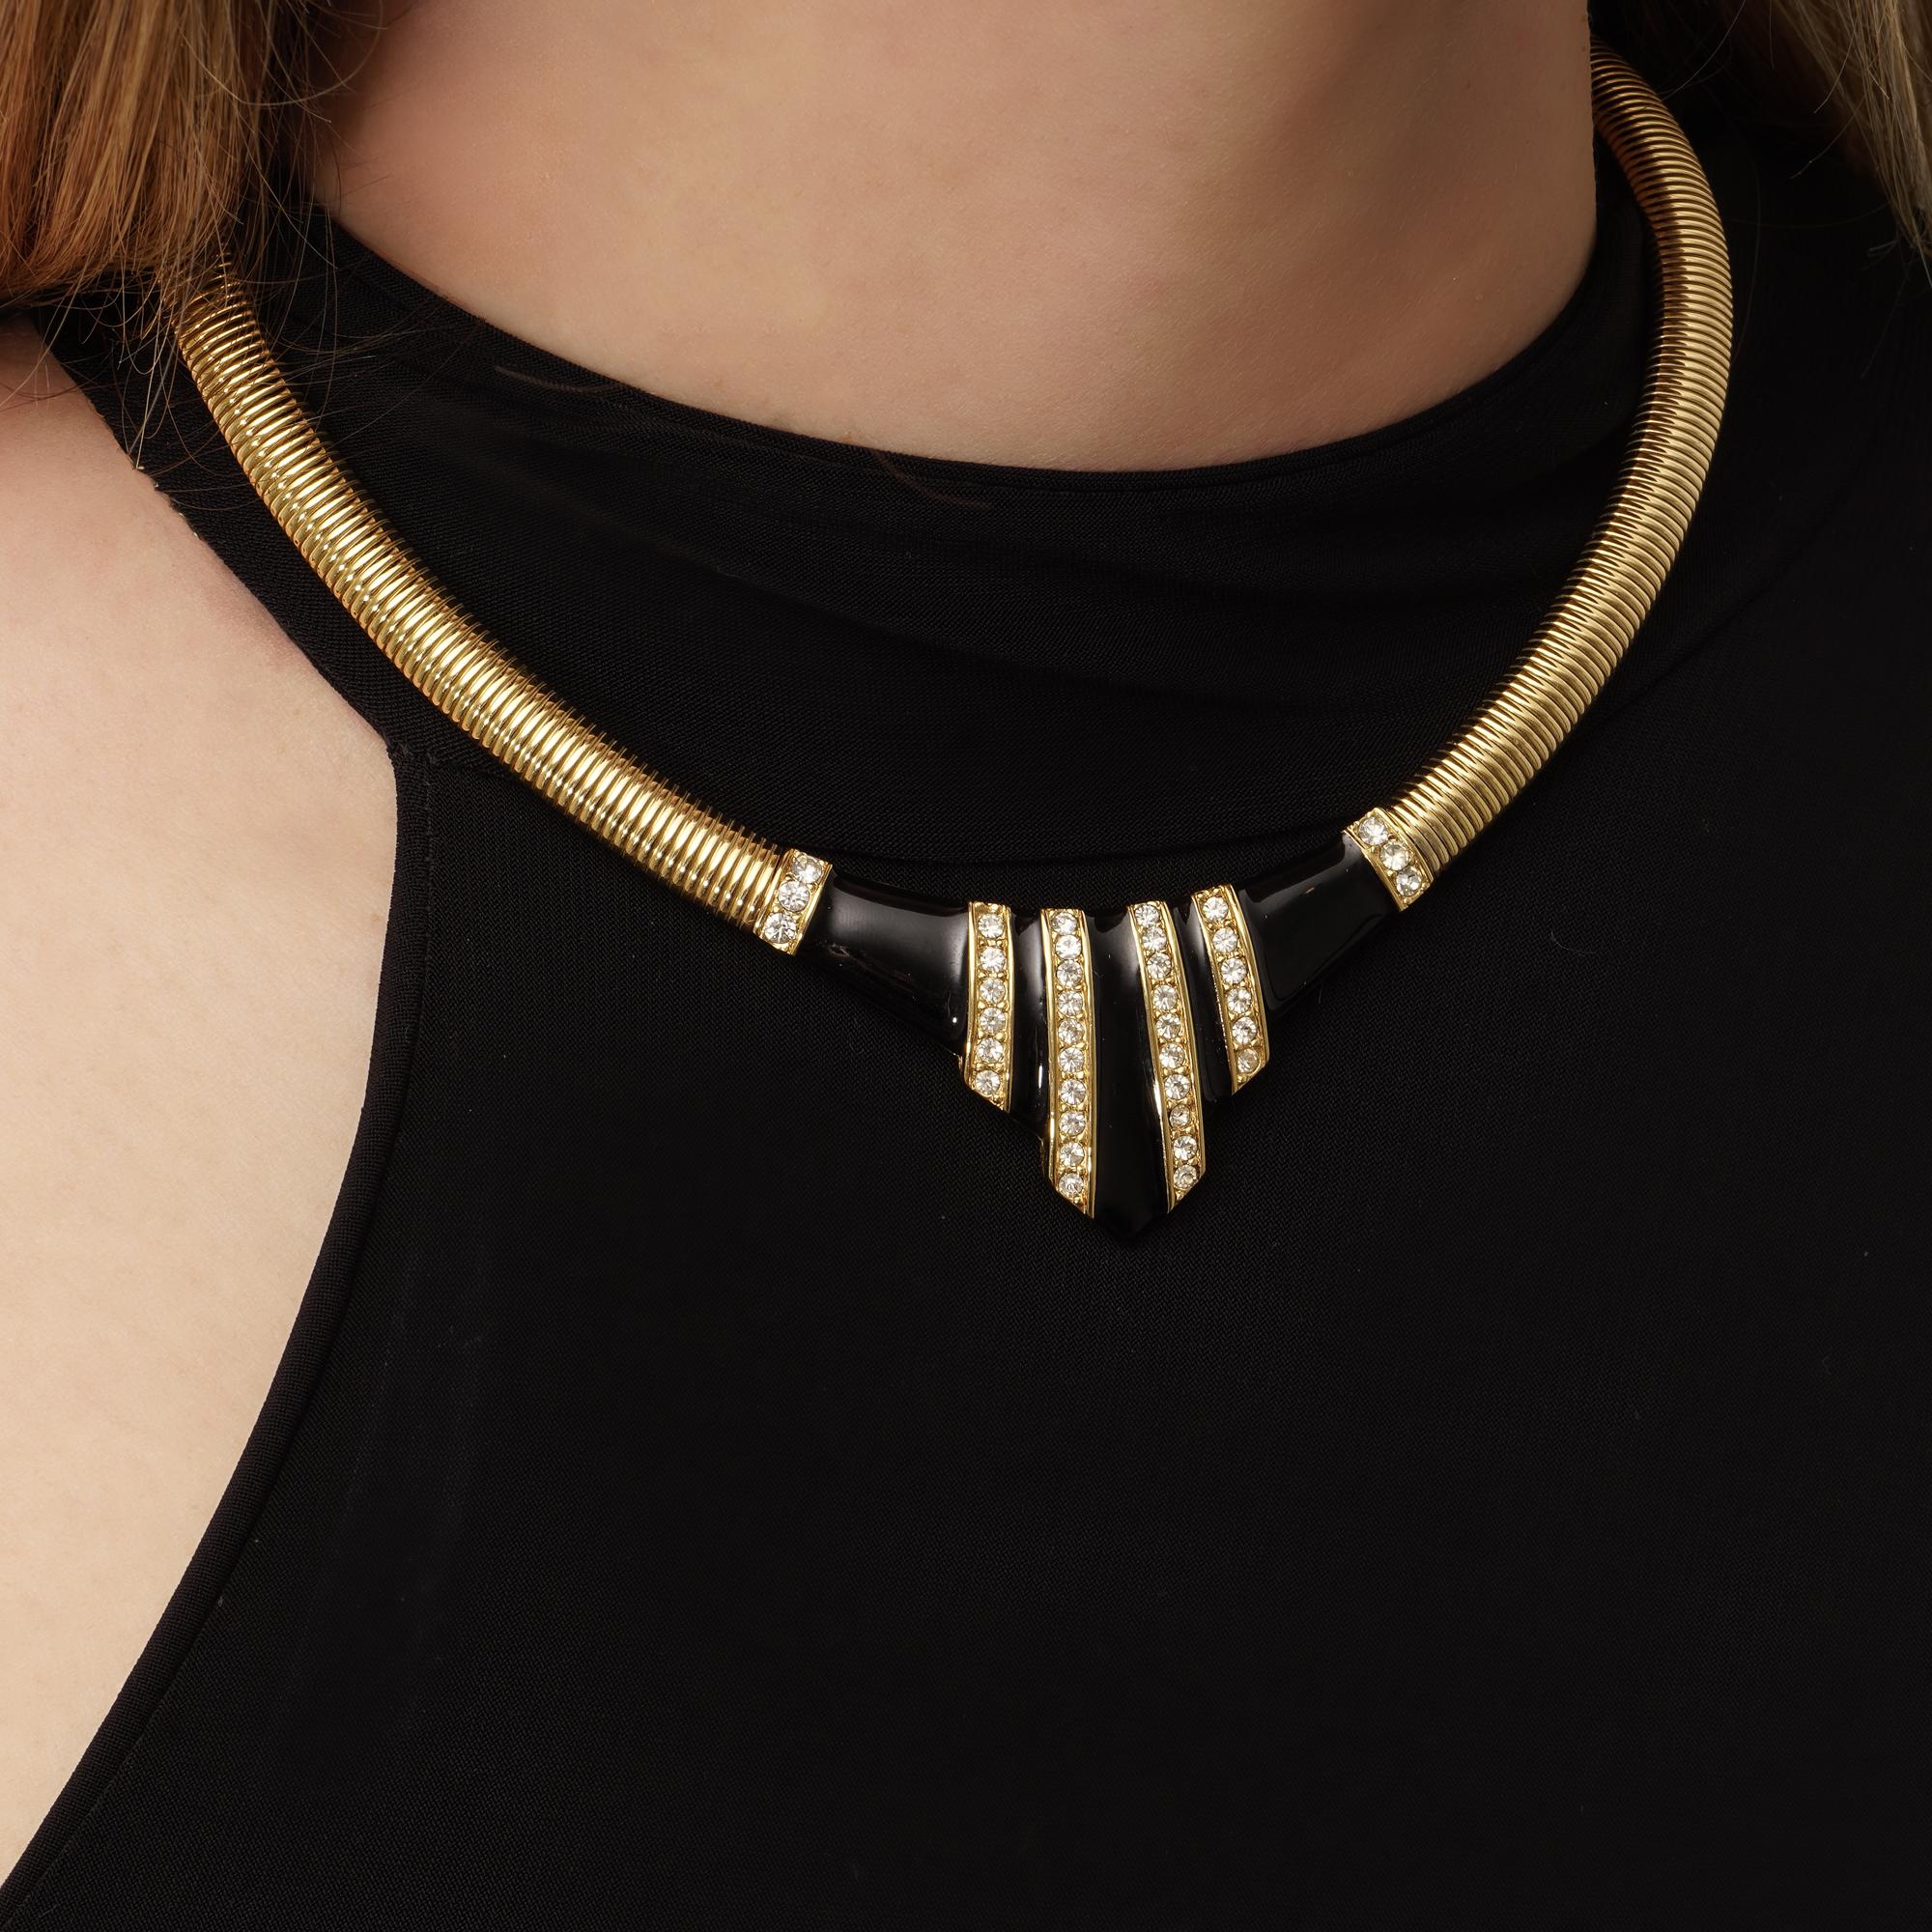 Step into the realm of vintage elegance with this Vintage Givenchy Geometric Design Gold Tone and Black Enamel Collar Necklace, crafted circa the 1980s, showcasing the distinctive style and sophistication characteristic of the Givenchy brand.

This